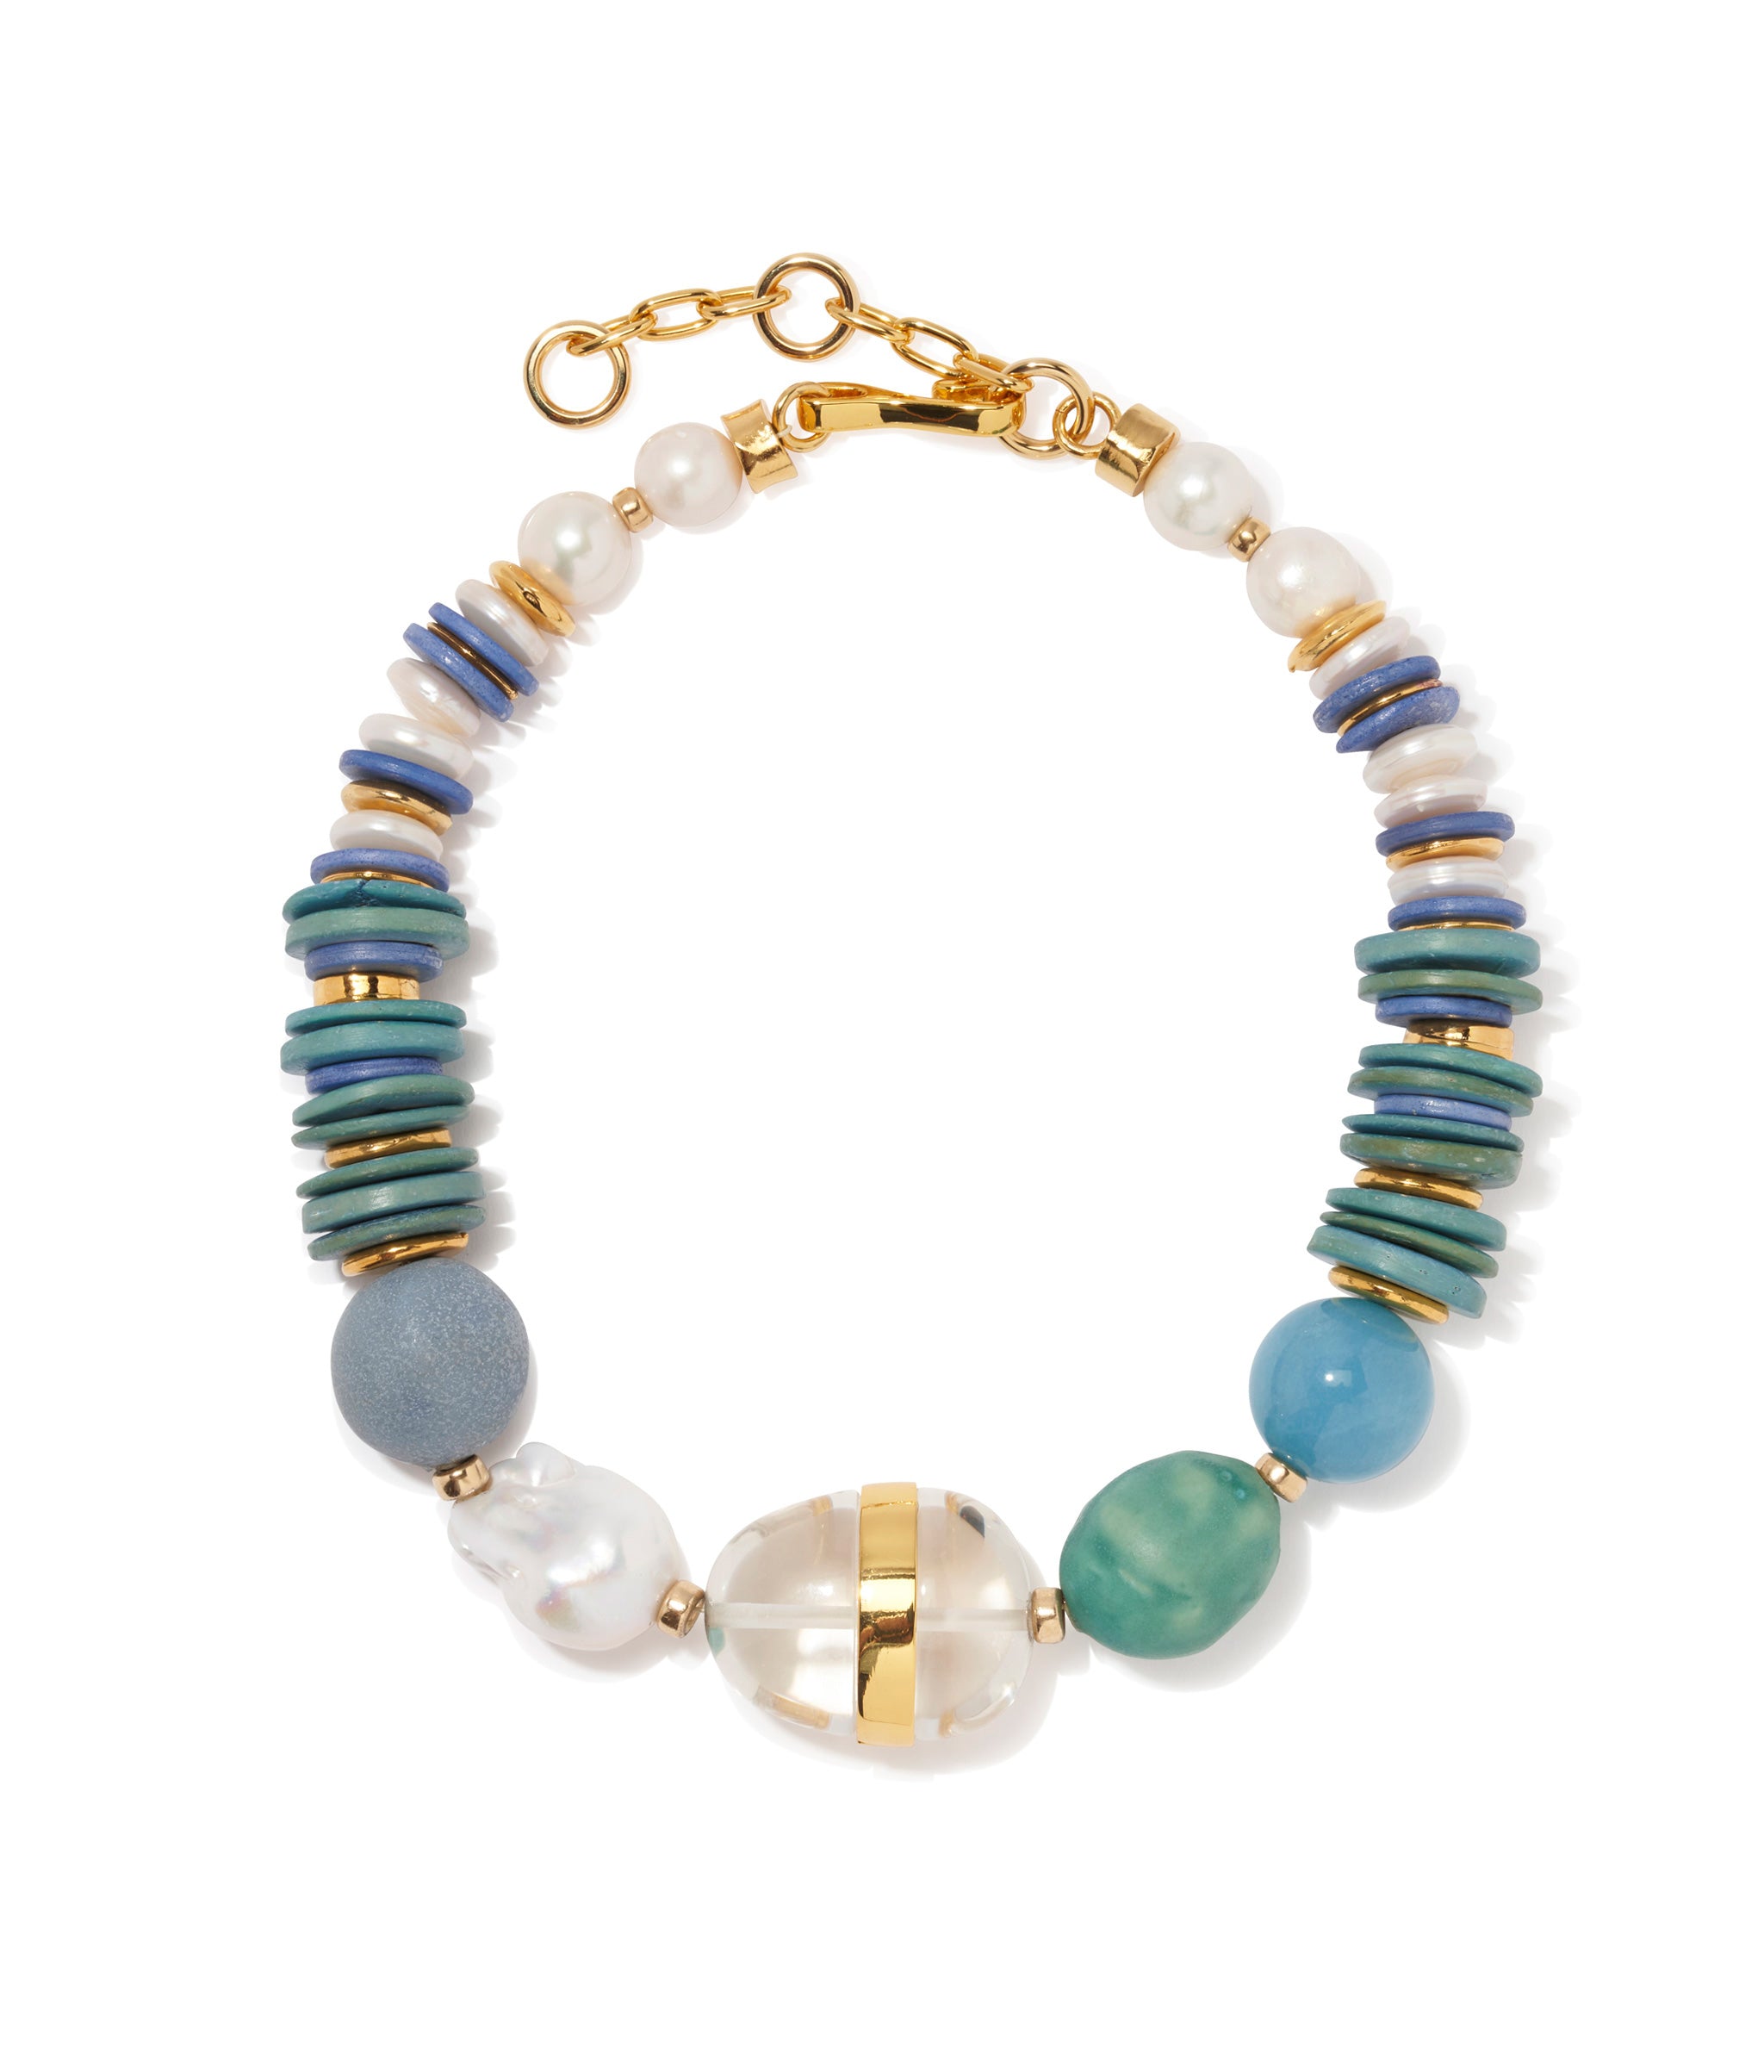 Neptune Collar. Blue bone beads, aqua-colored coconut shell, blue quartz, gold, pearls, clear resin and gold bead focal.